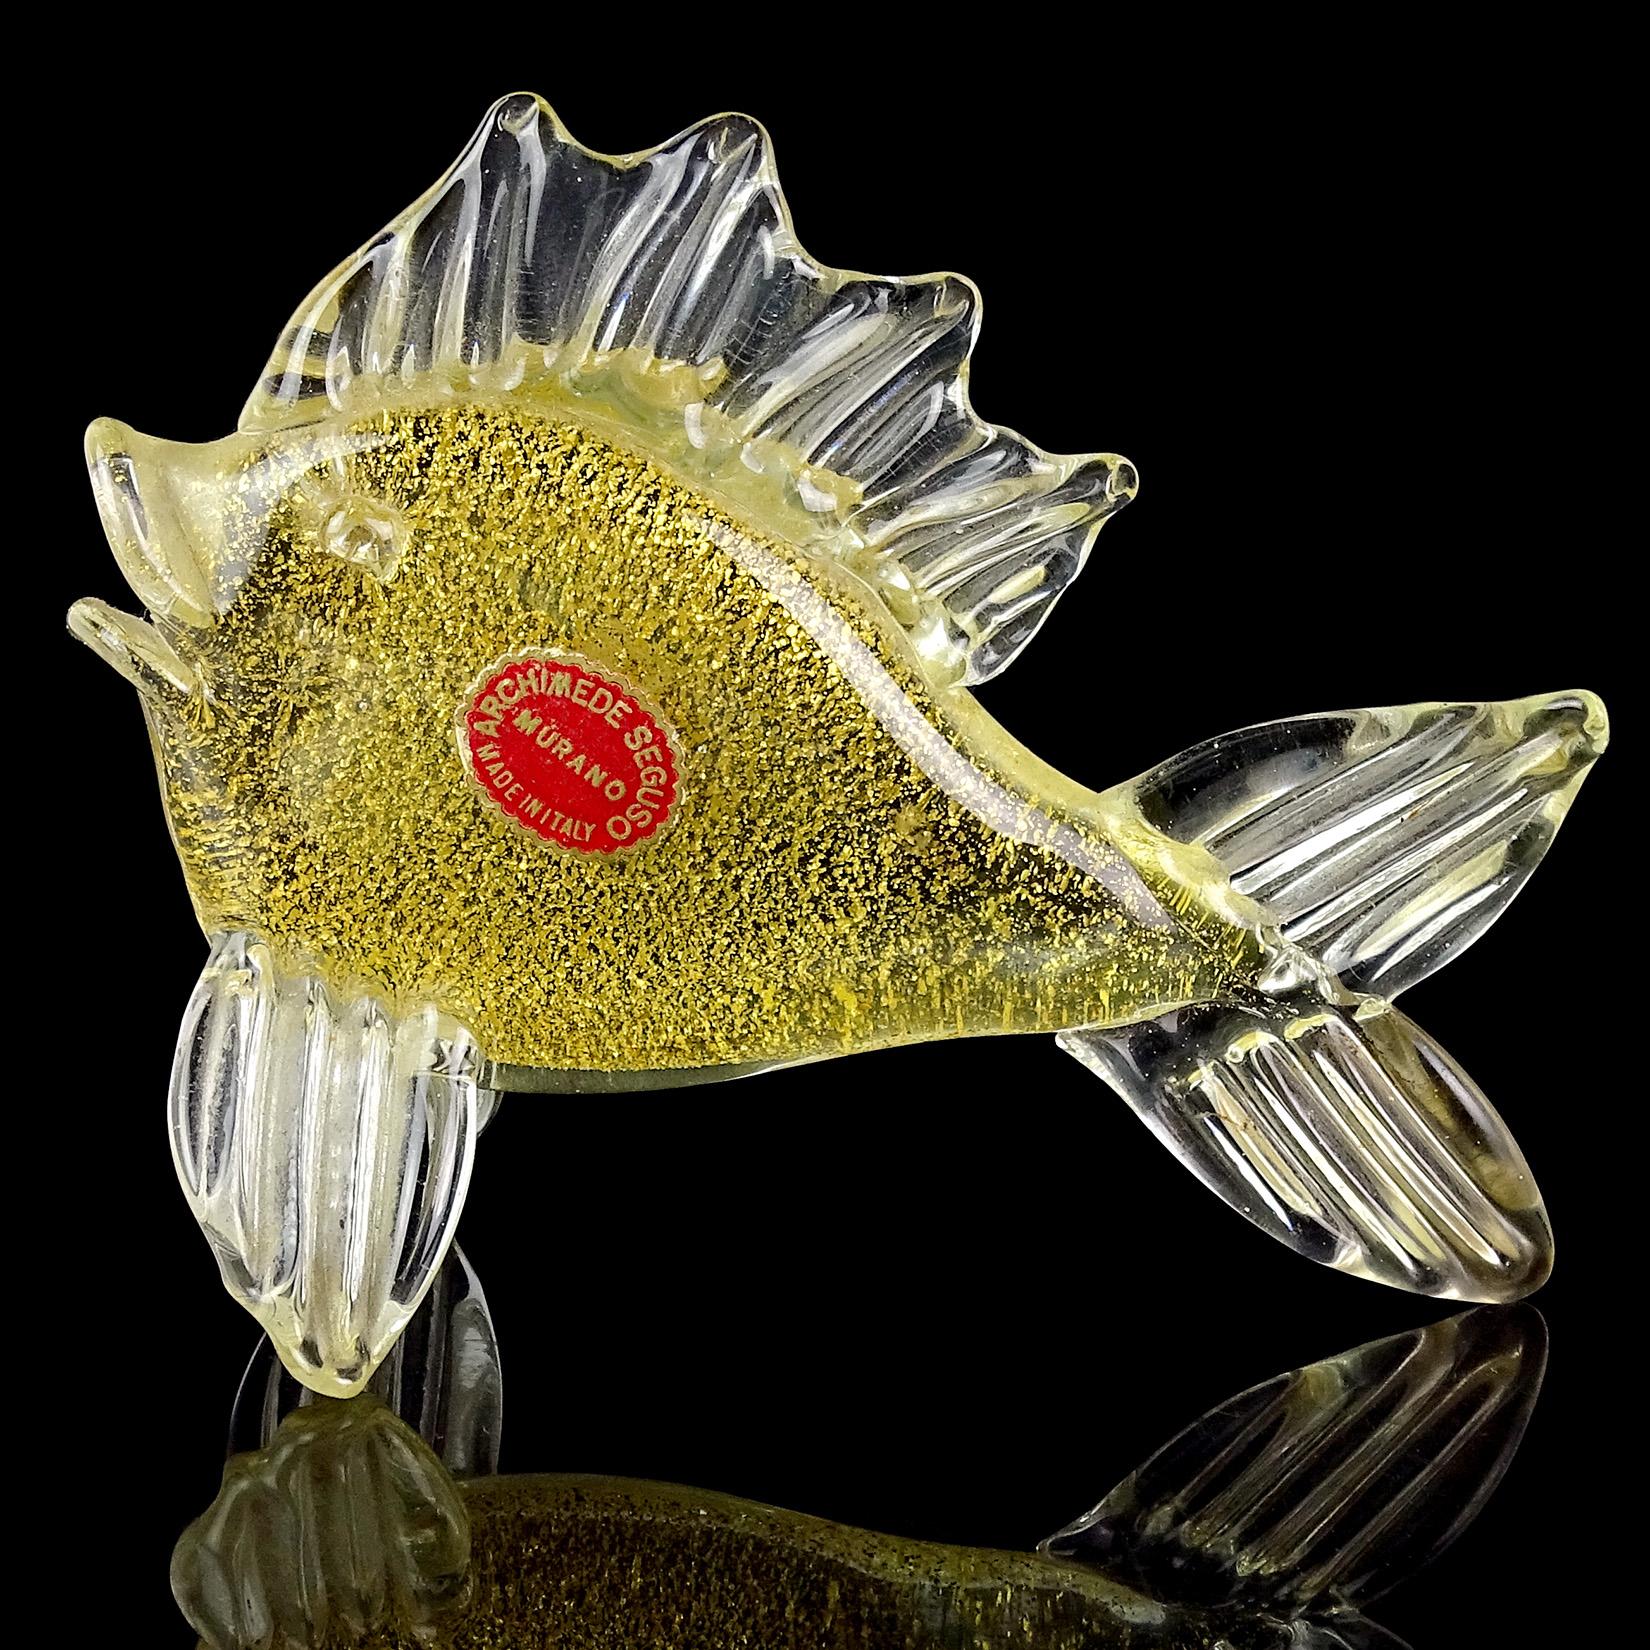 Beautiful vintage Murano hand blown clear and gold flecks Italian art glass fish sculpture / figurine. Documented to designer Archimede Seguso. The piece is profusely covered in gold leaf, with original label 